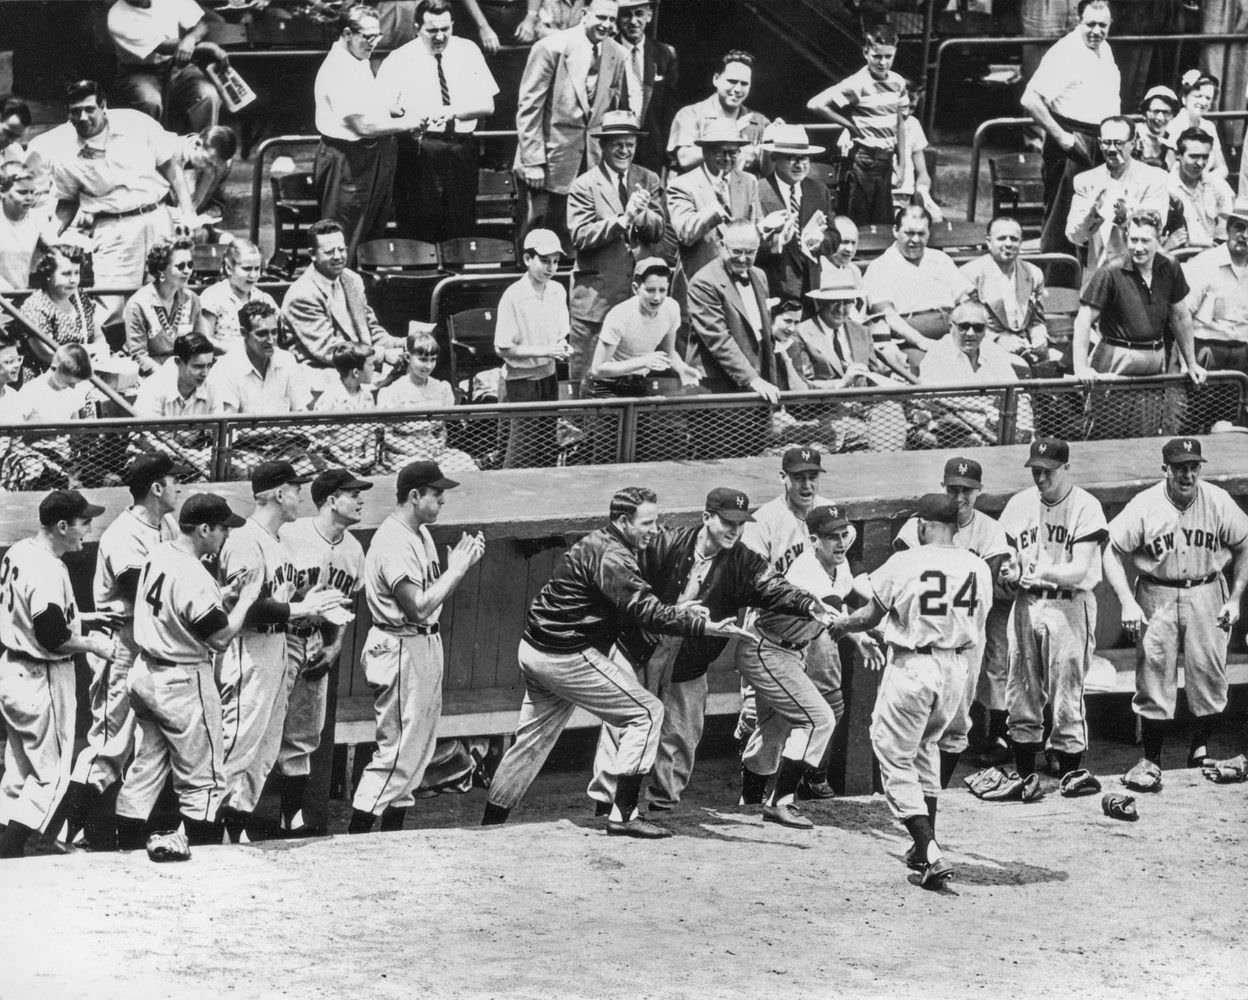 Teammates and fans applaud and reach out the shake the hand of American baseball player Willie Mays of the New York Giants after a home run in the 1950s